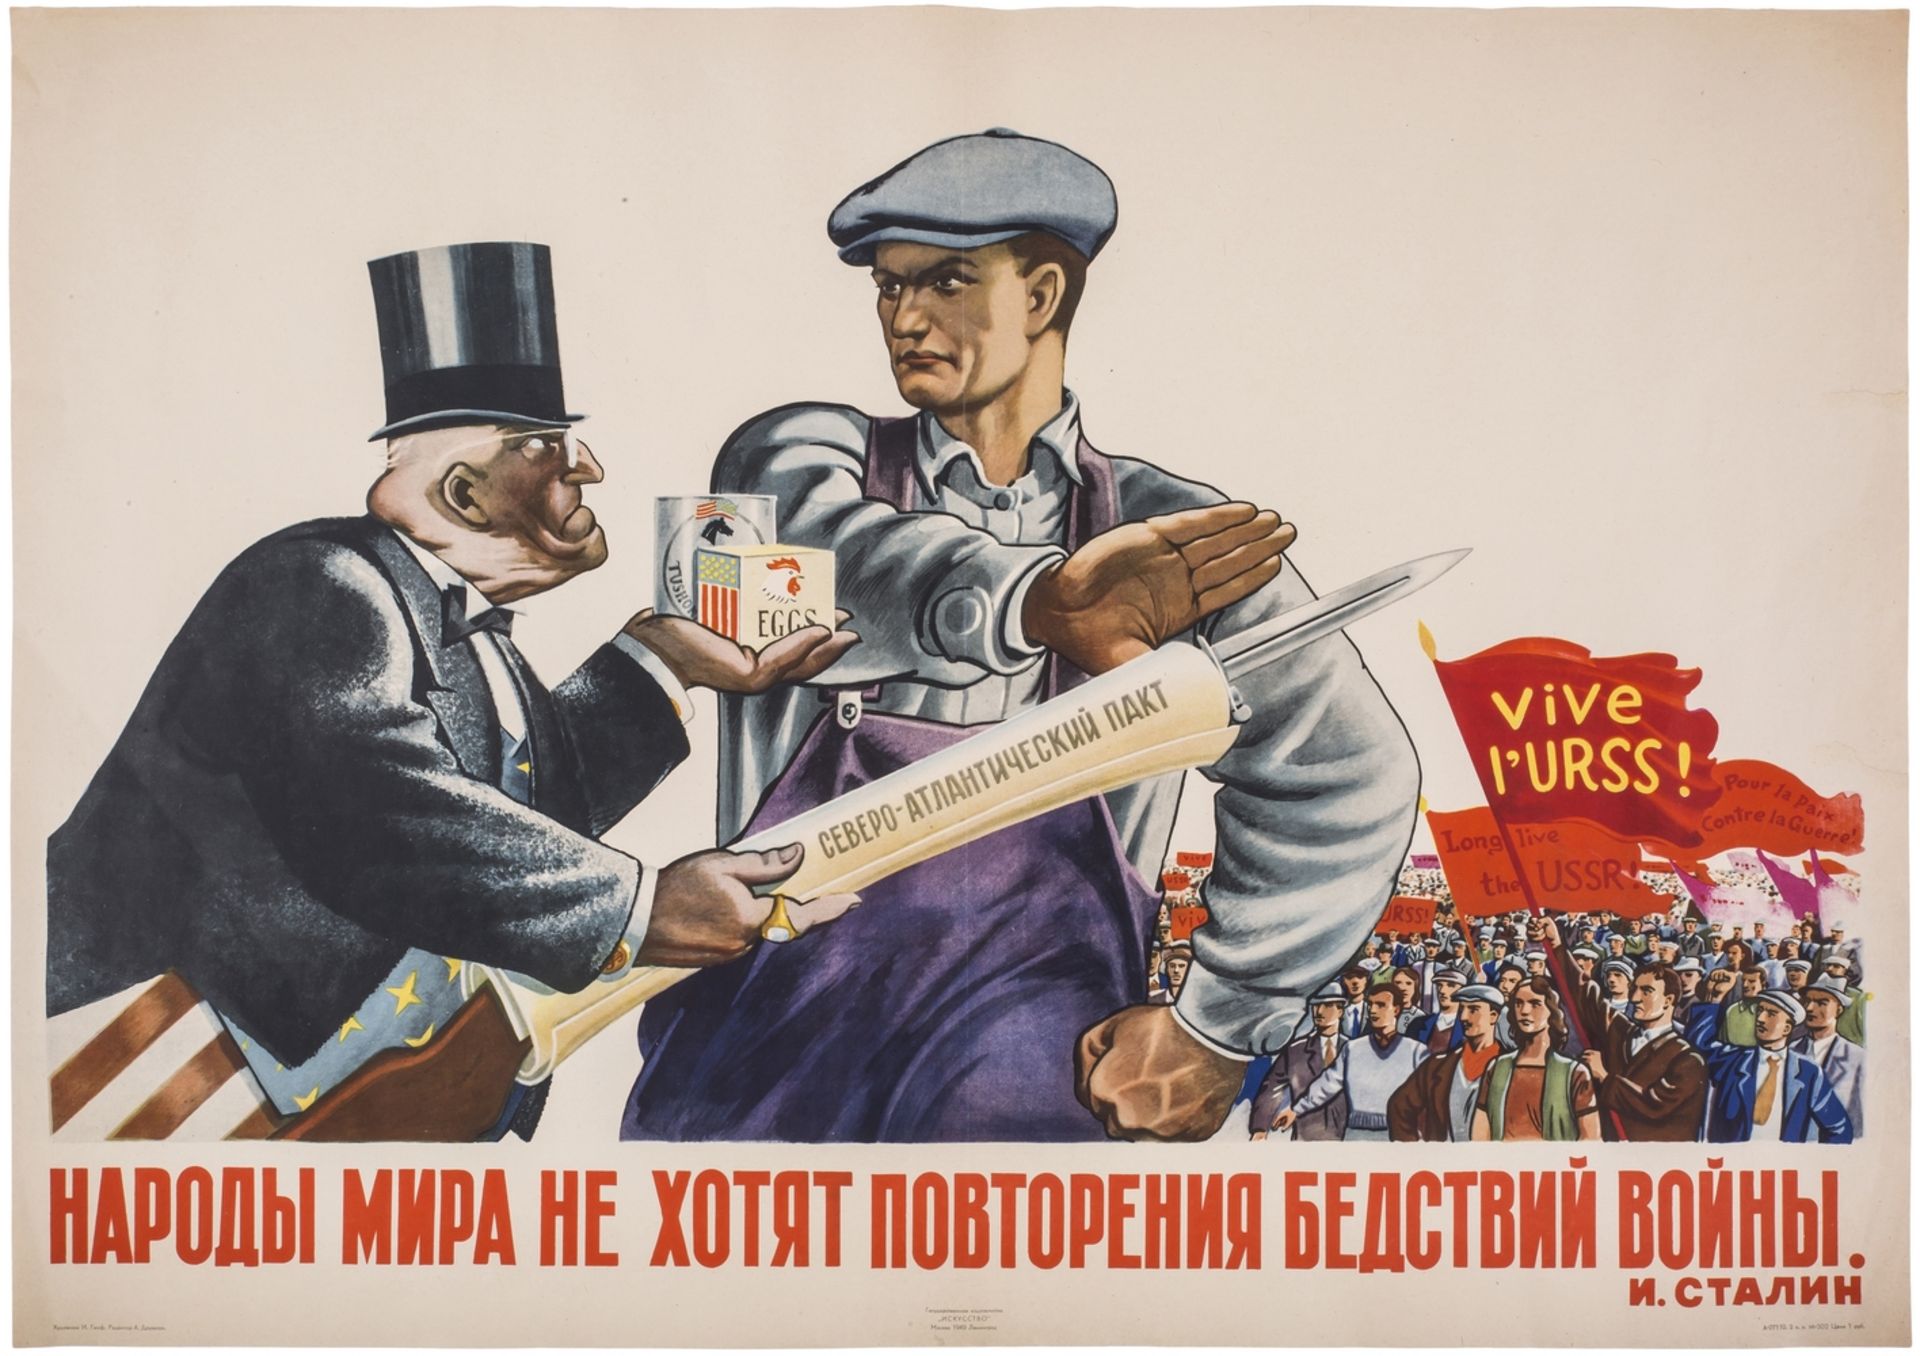 [Soviet art]. Ganf, I.A. "The nations don't want recurrence of calamity of war". Moscow; Leningrad, 